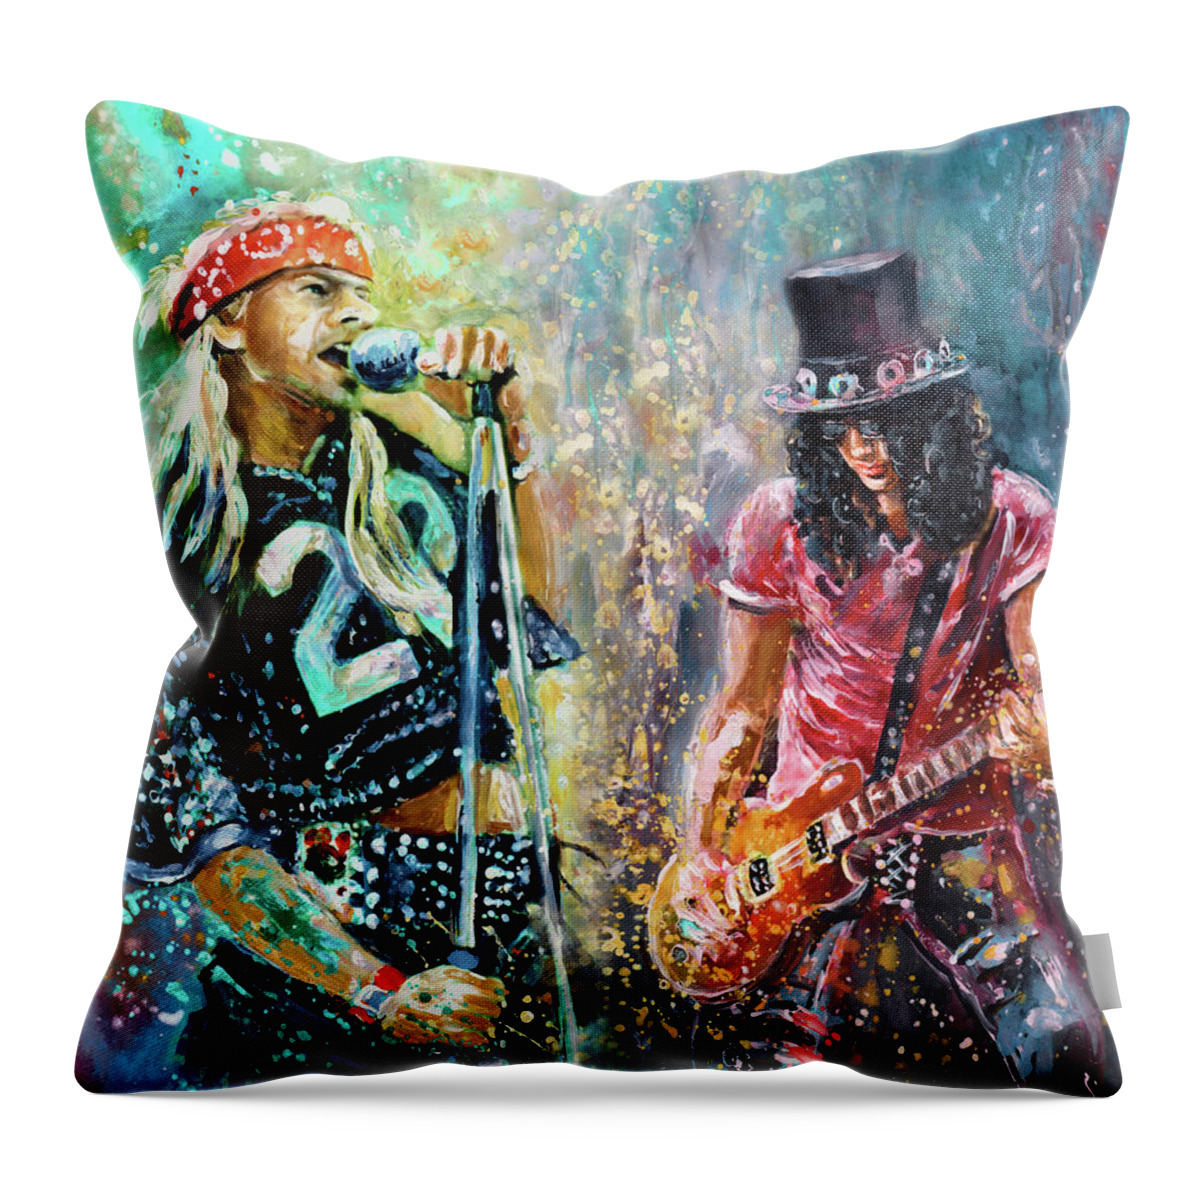 Music Throw Pillow featuring the painting Axl Rose And Slash by Miki De Goodaboom